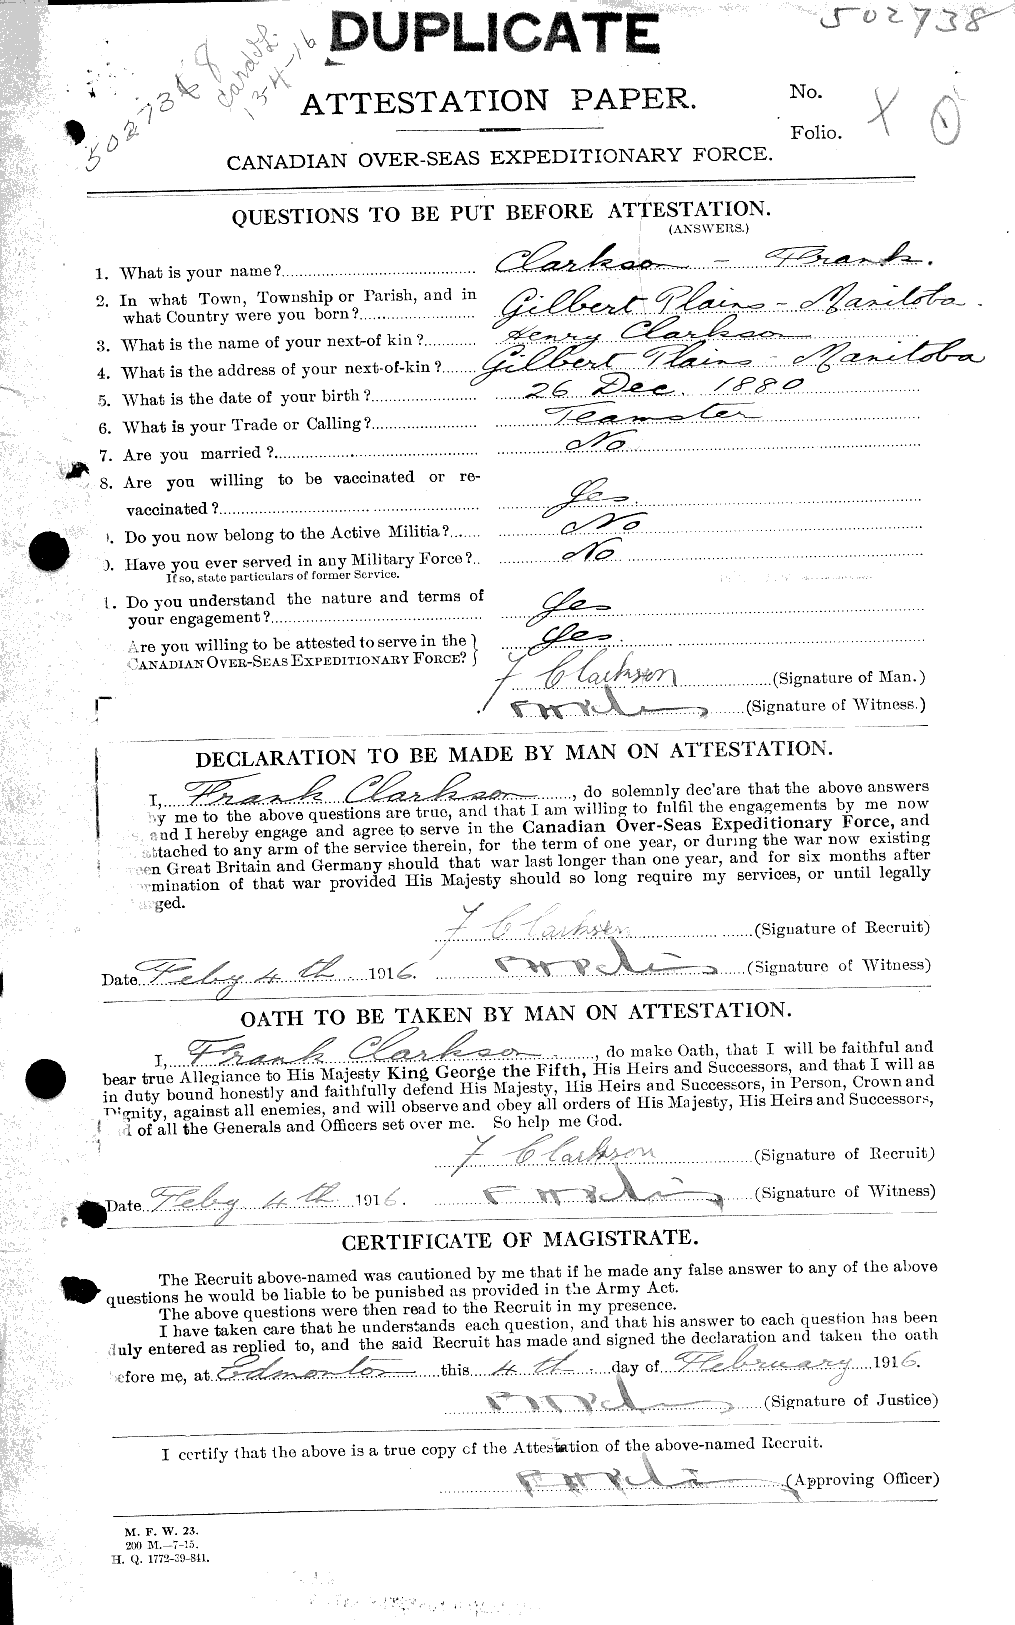 Personnel Records of the First World War - CEF 023637a